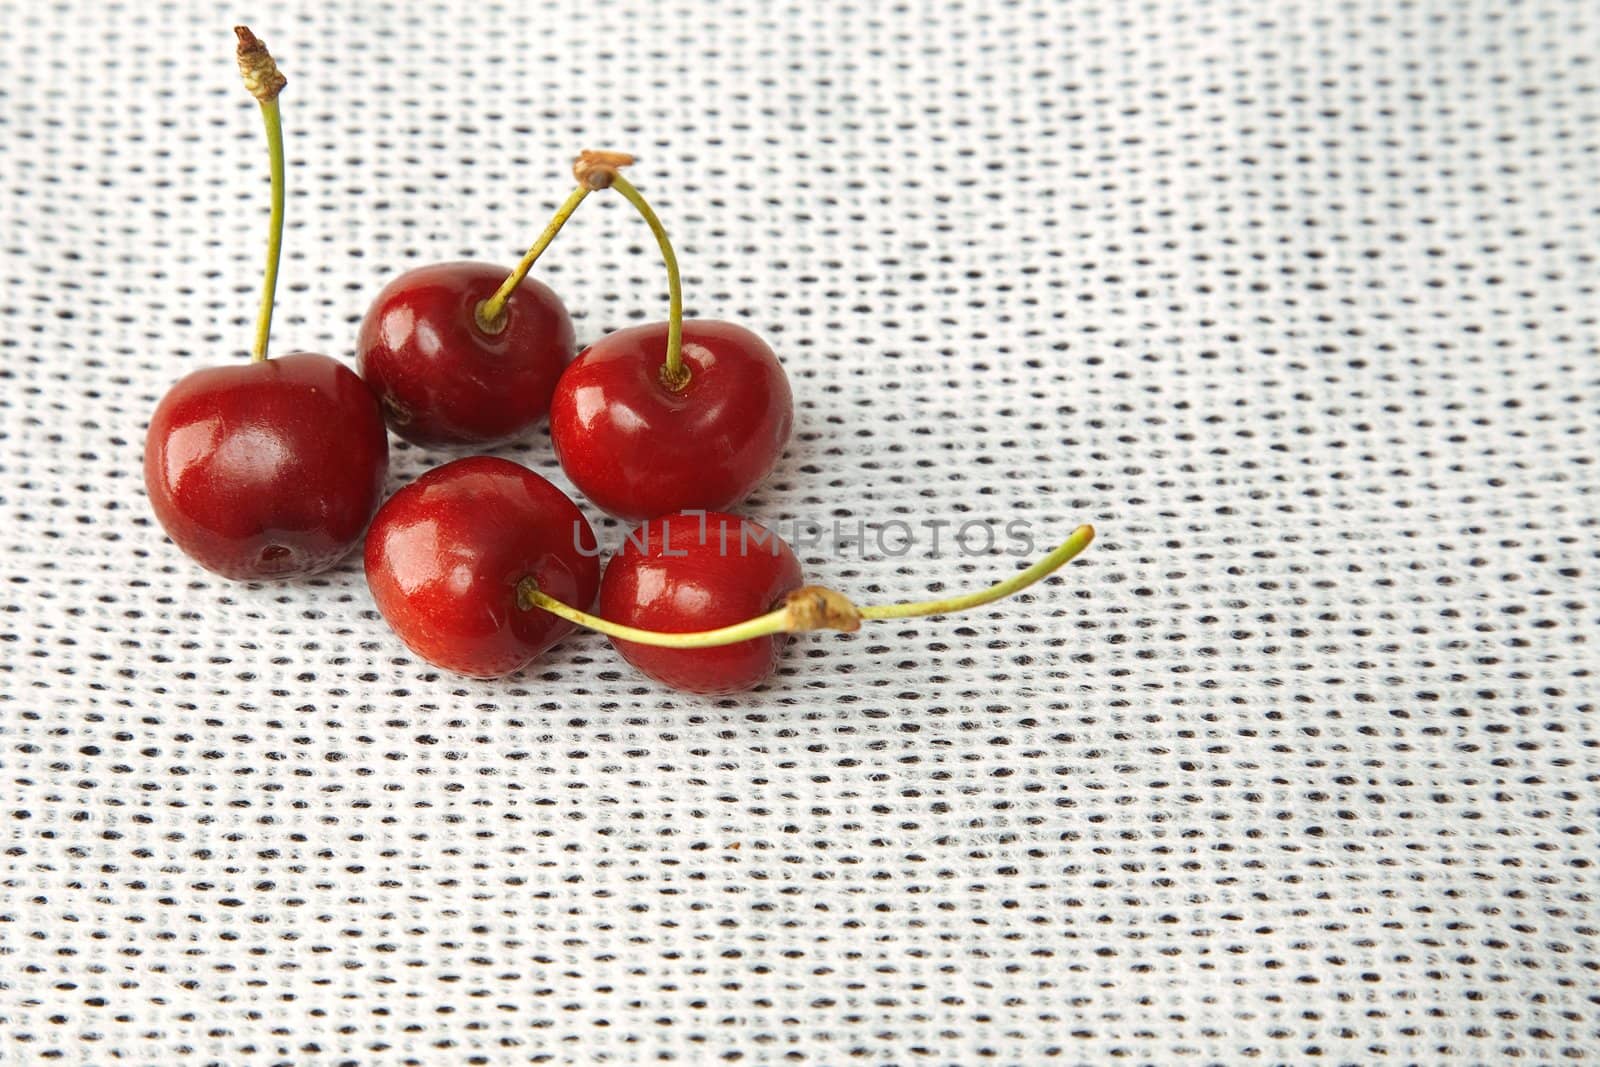 front view of sweet red cherries on white fabric